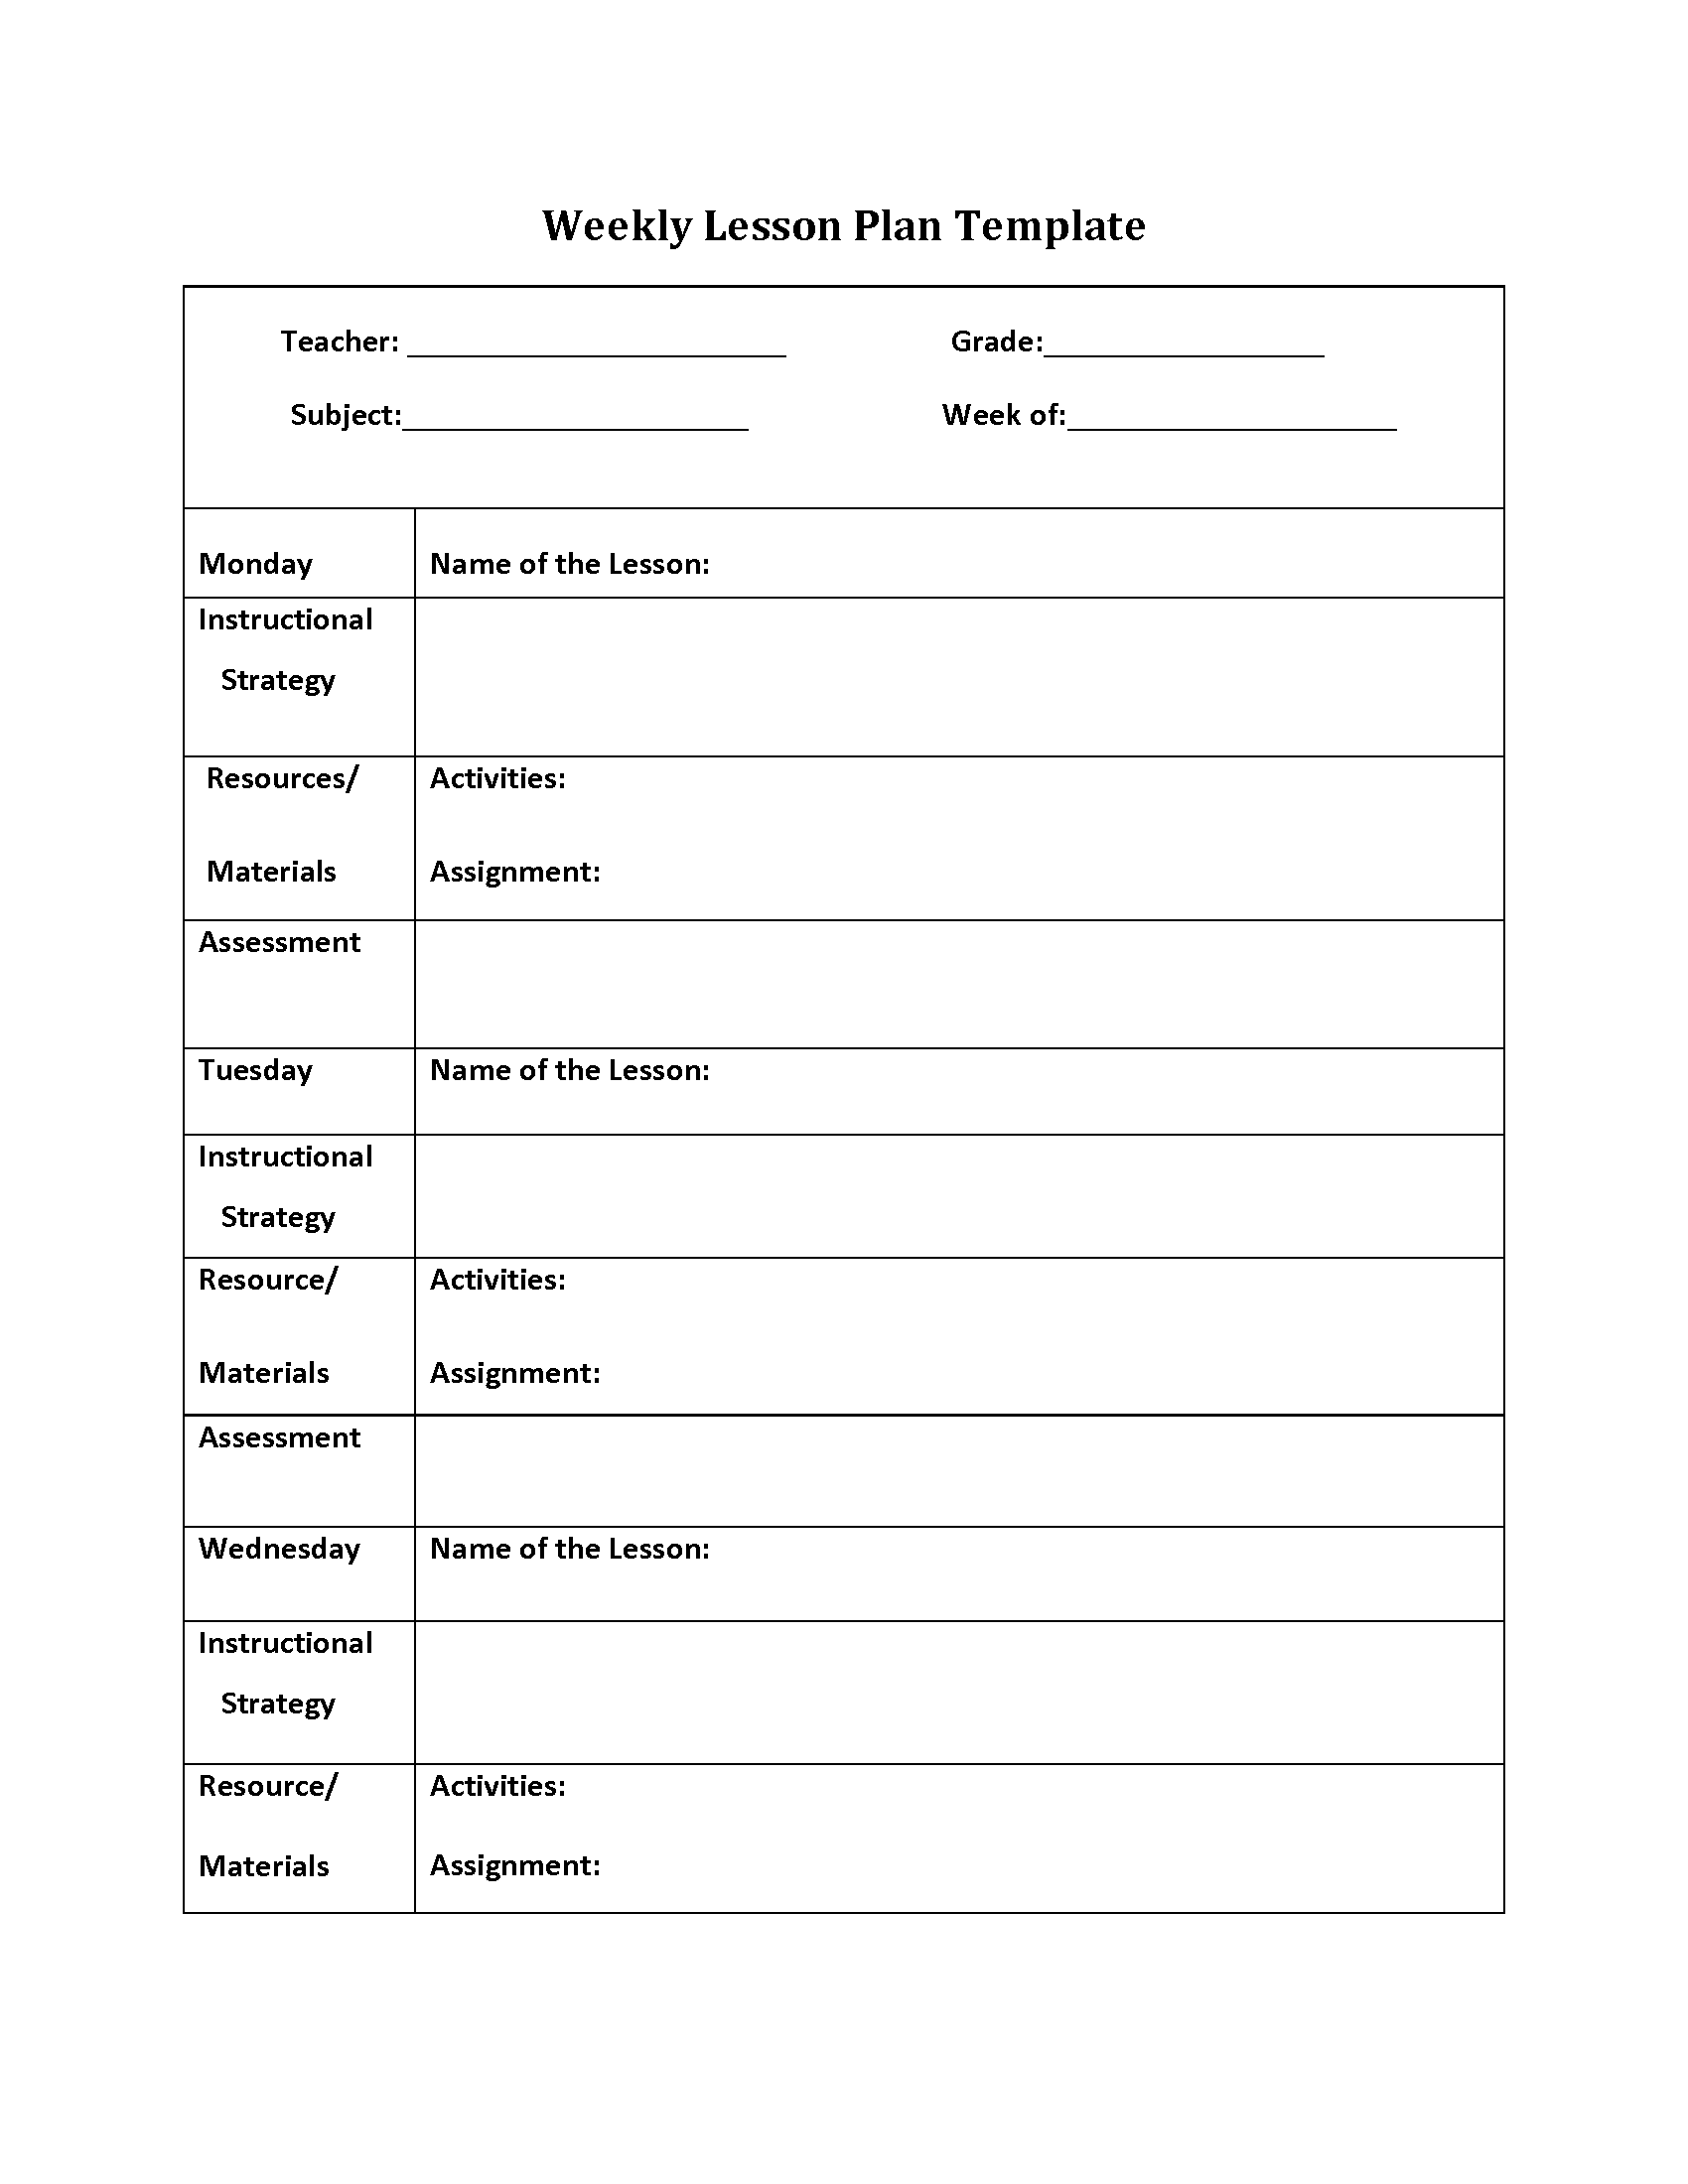 Weekly Assignment Template from englishlinx.com